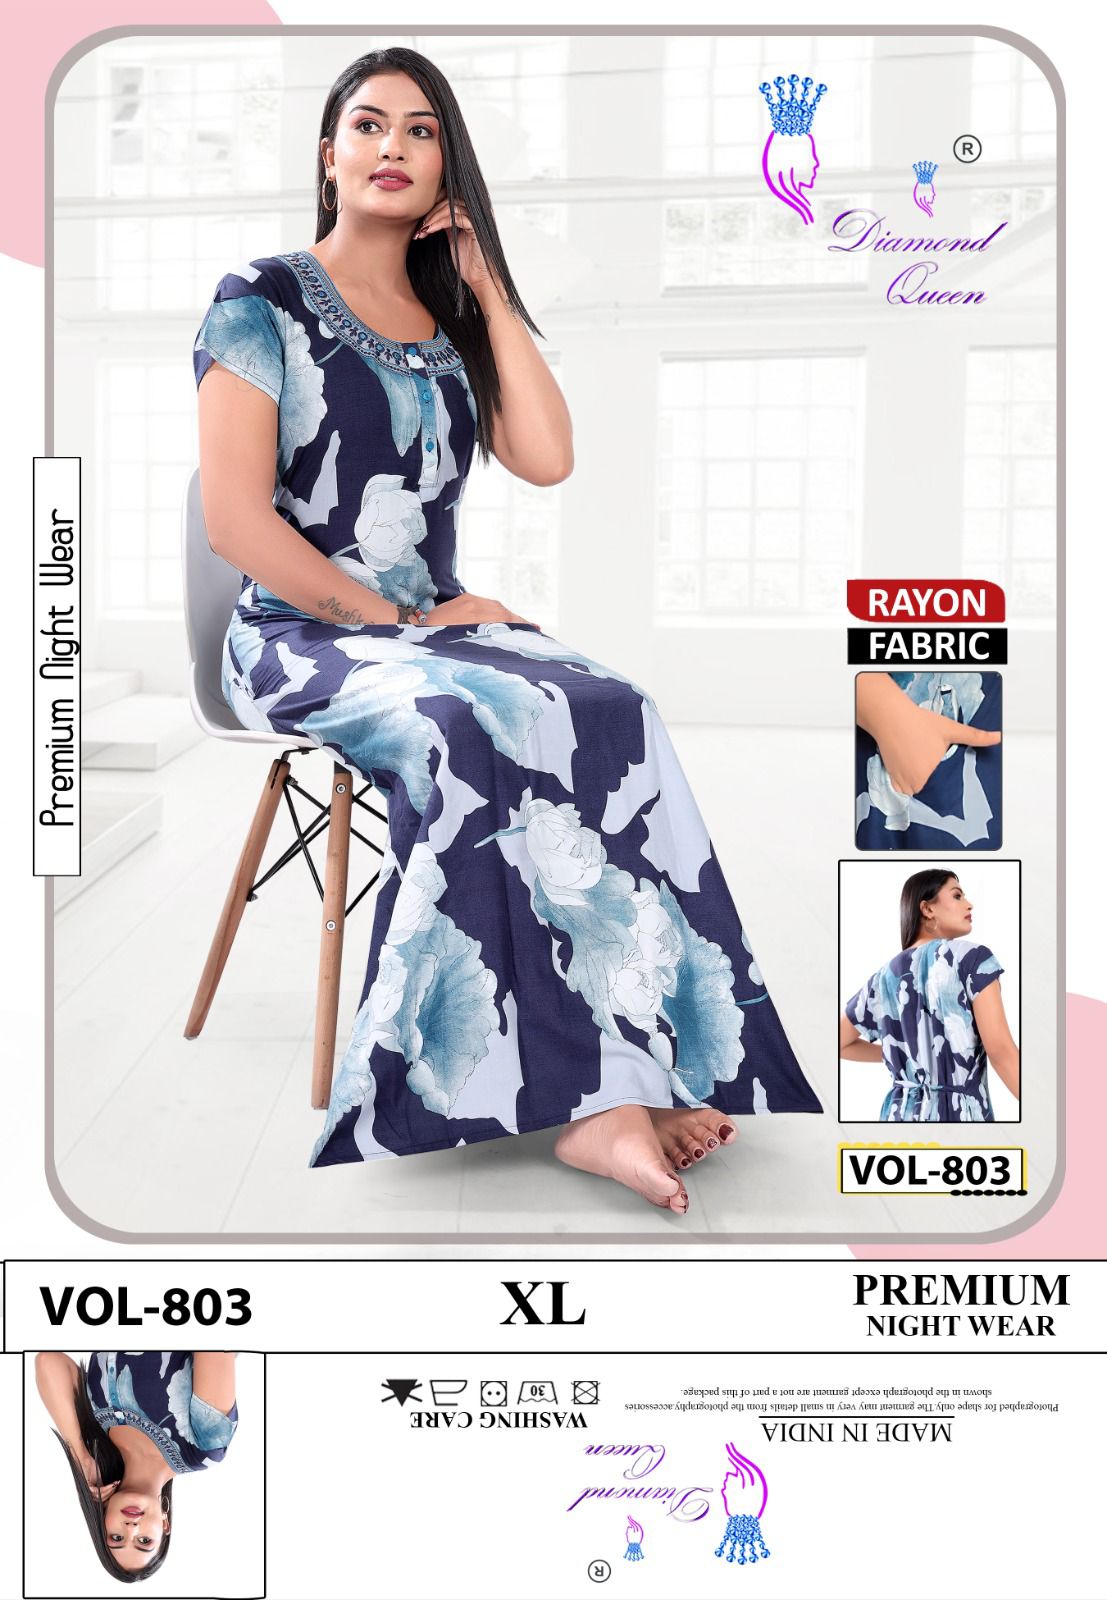 801-803 Diamond Queen Rayon Night Gowns